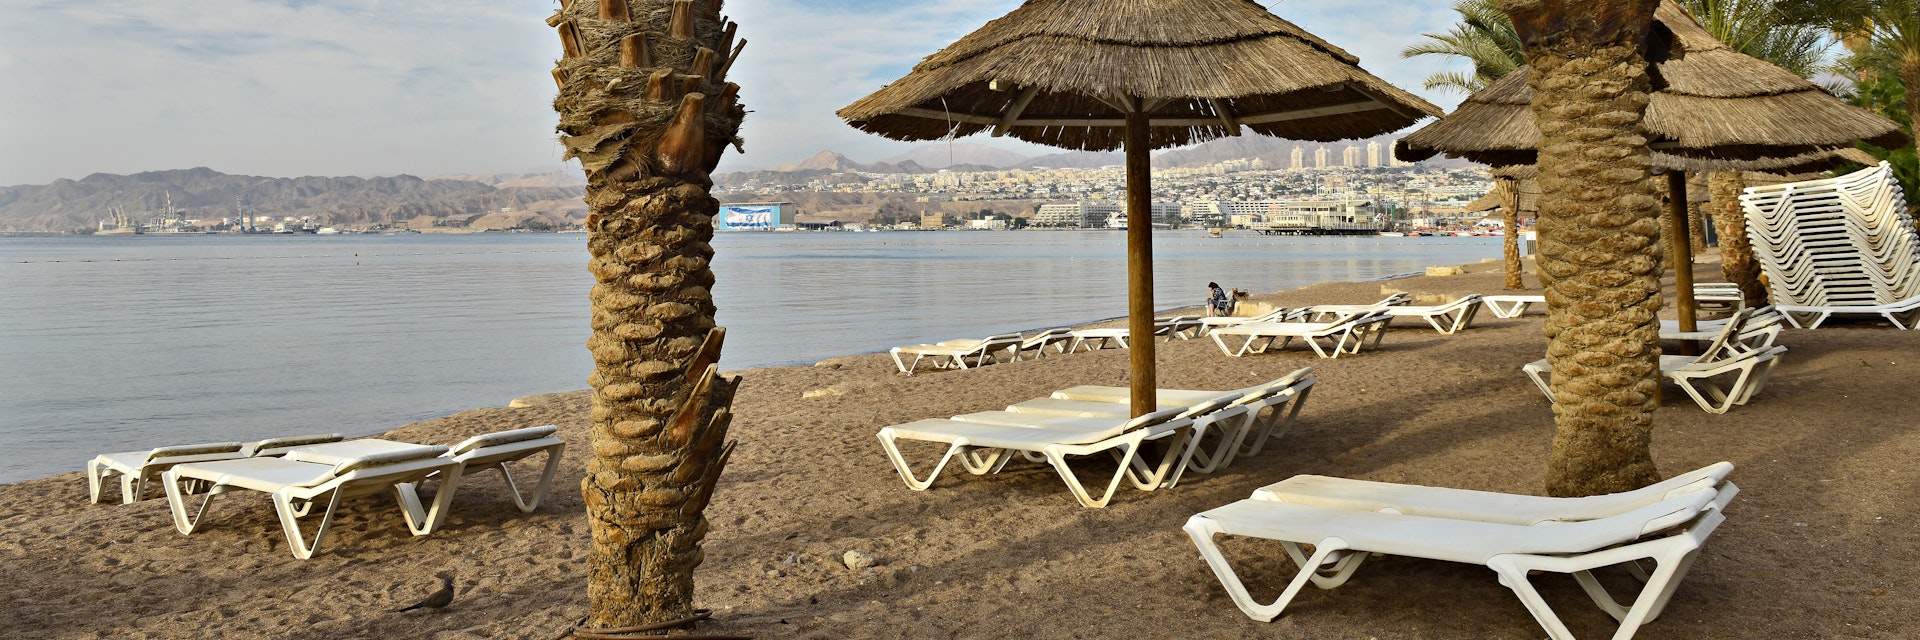 Morning view on the North beach of Eilat, Israel.